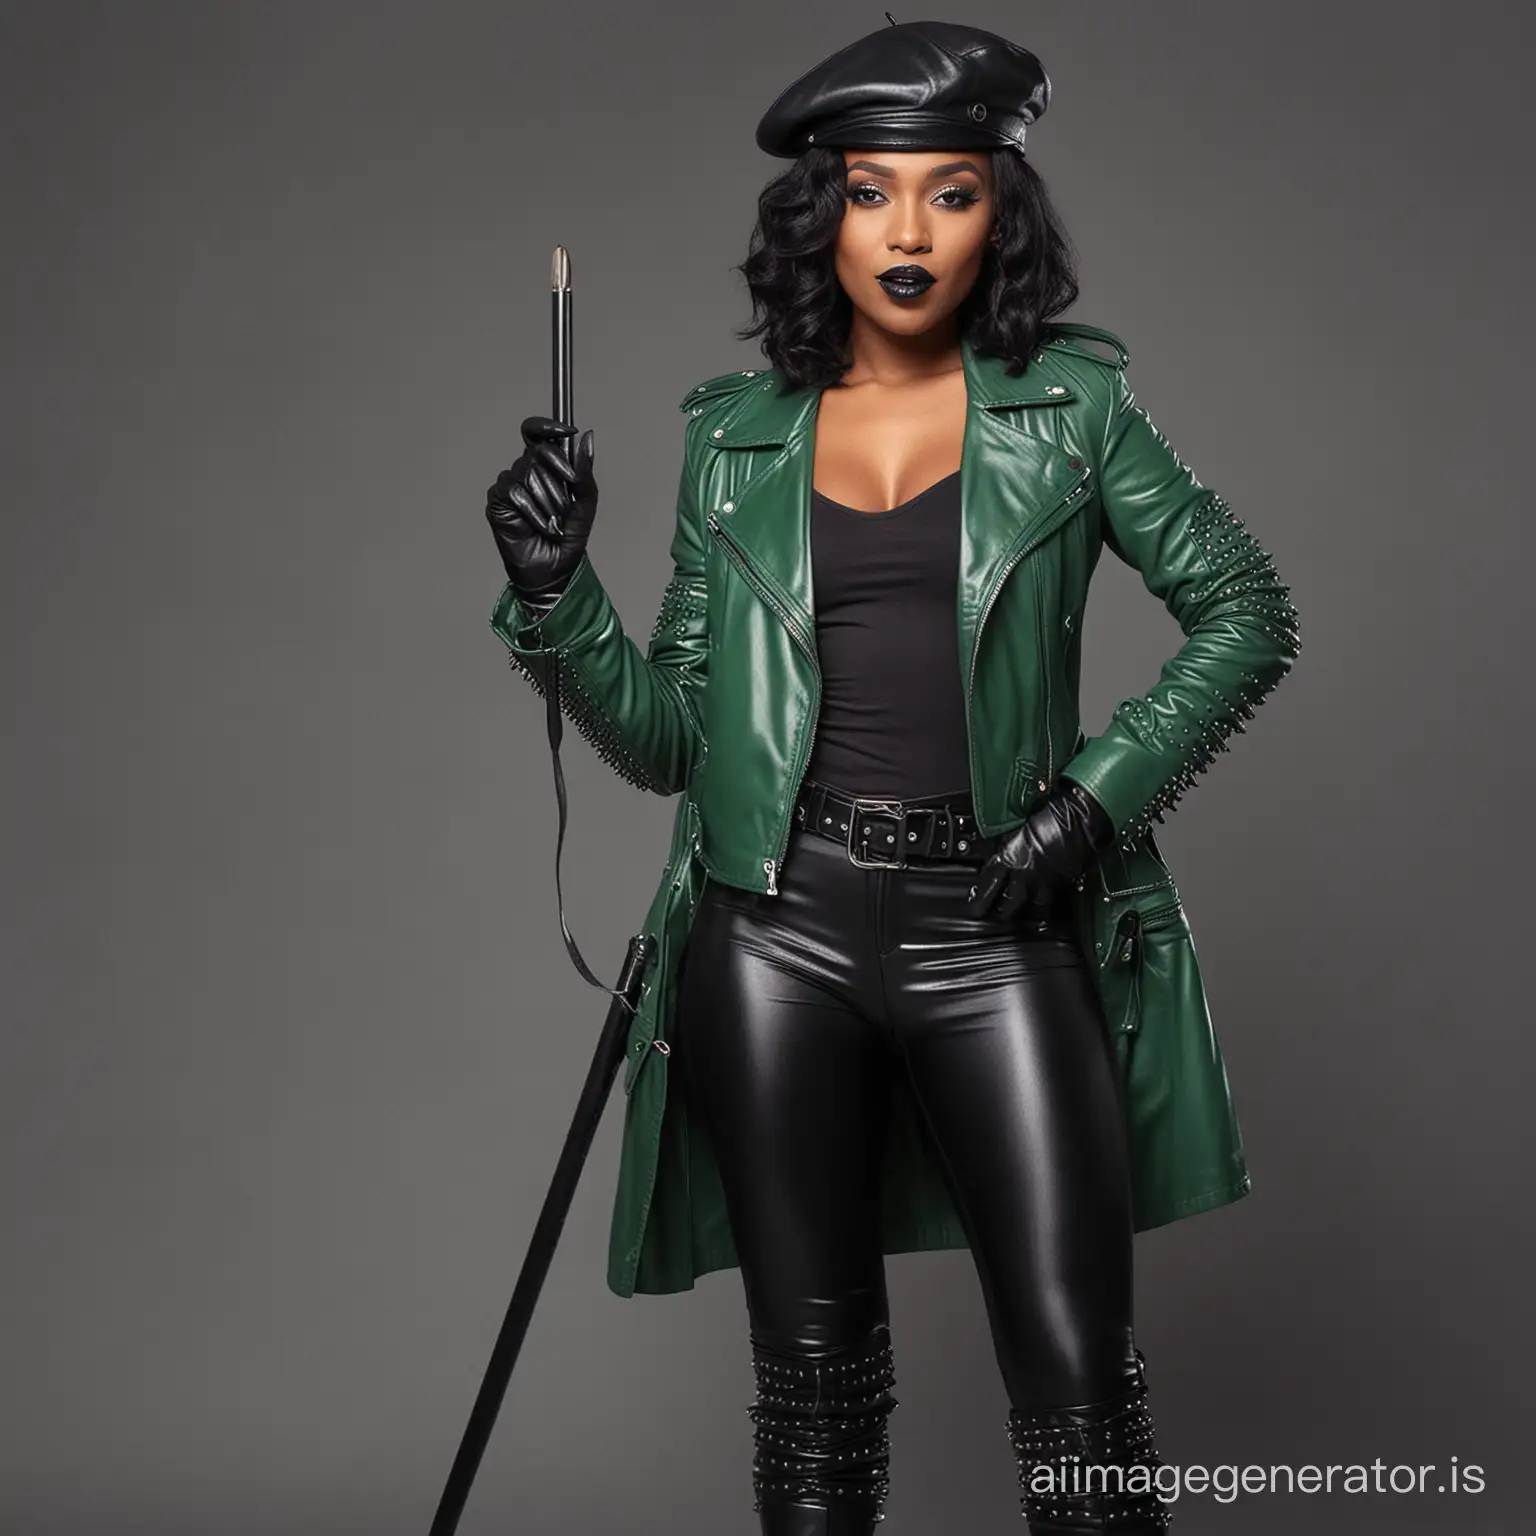 Stylish-Ebony-Woman-in-Edgy-Leather-Ensemble-with-Nightstick